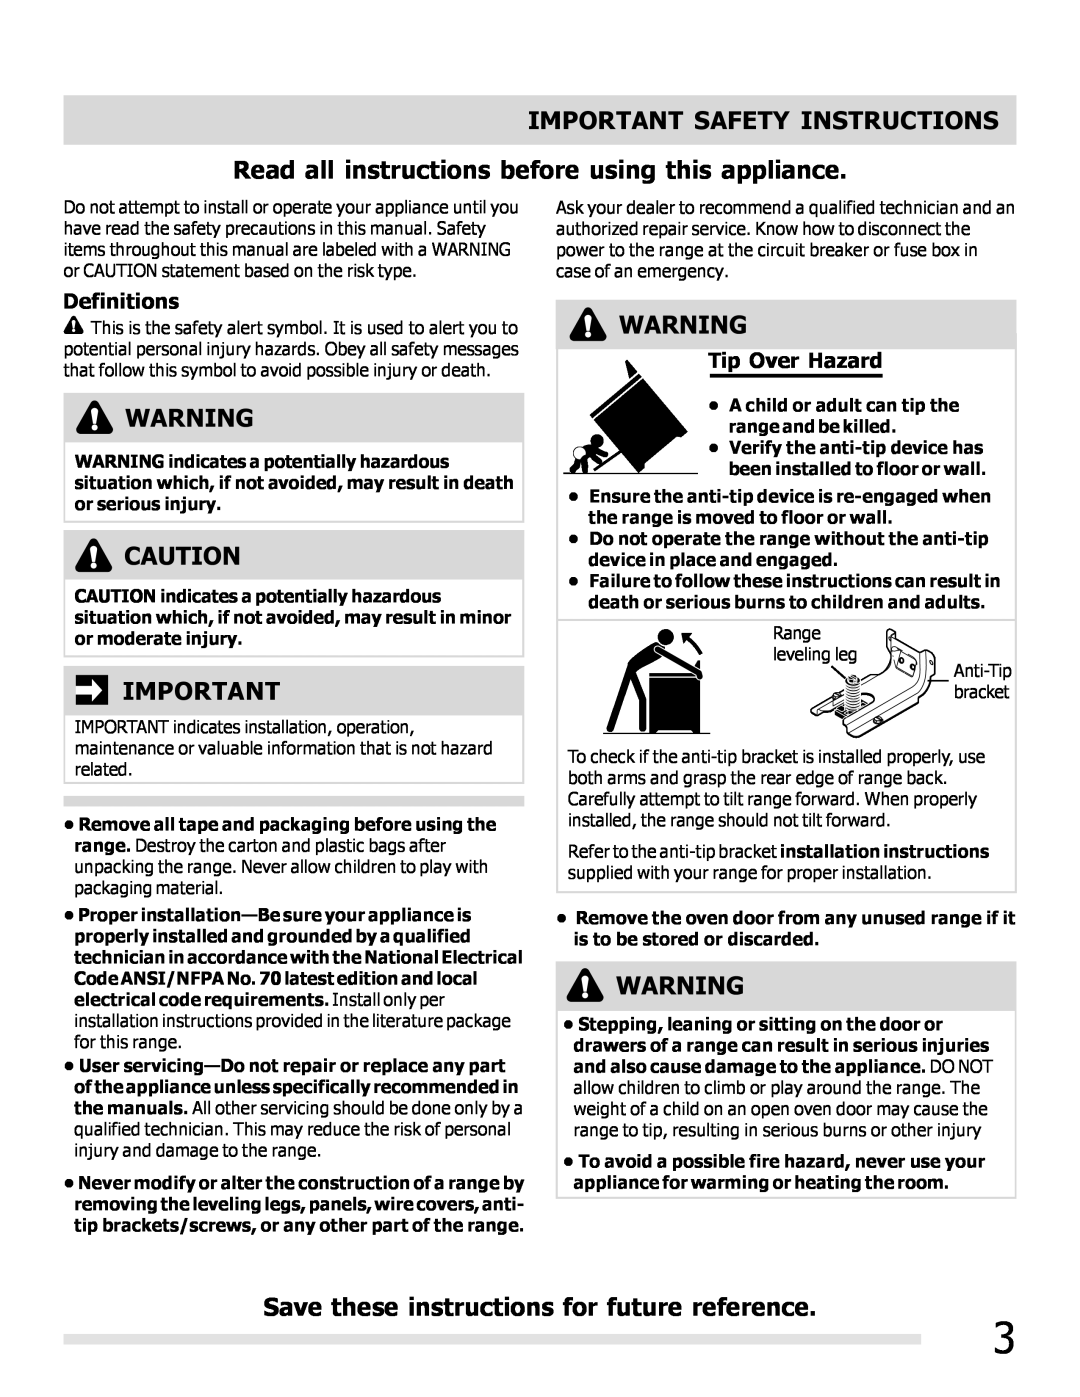 Frigidaire FFEF3019MB Important Safety Instructions, Read all instructions before using this appliance, Definitions 